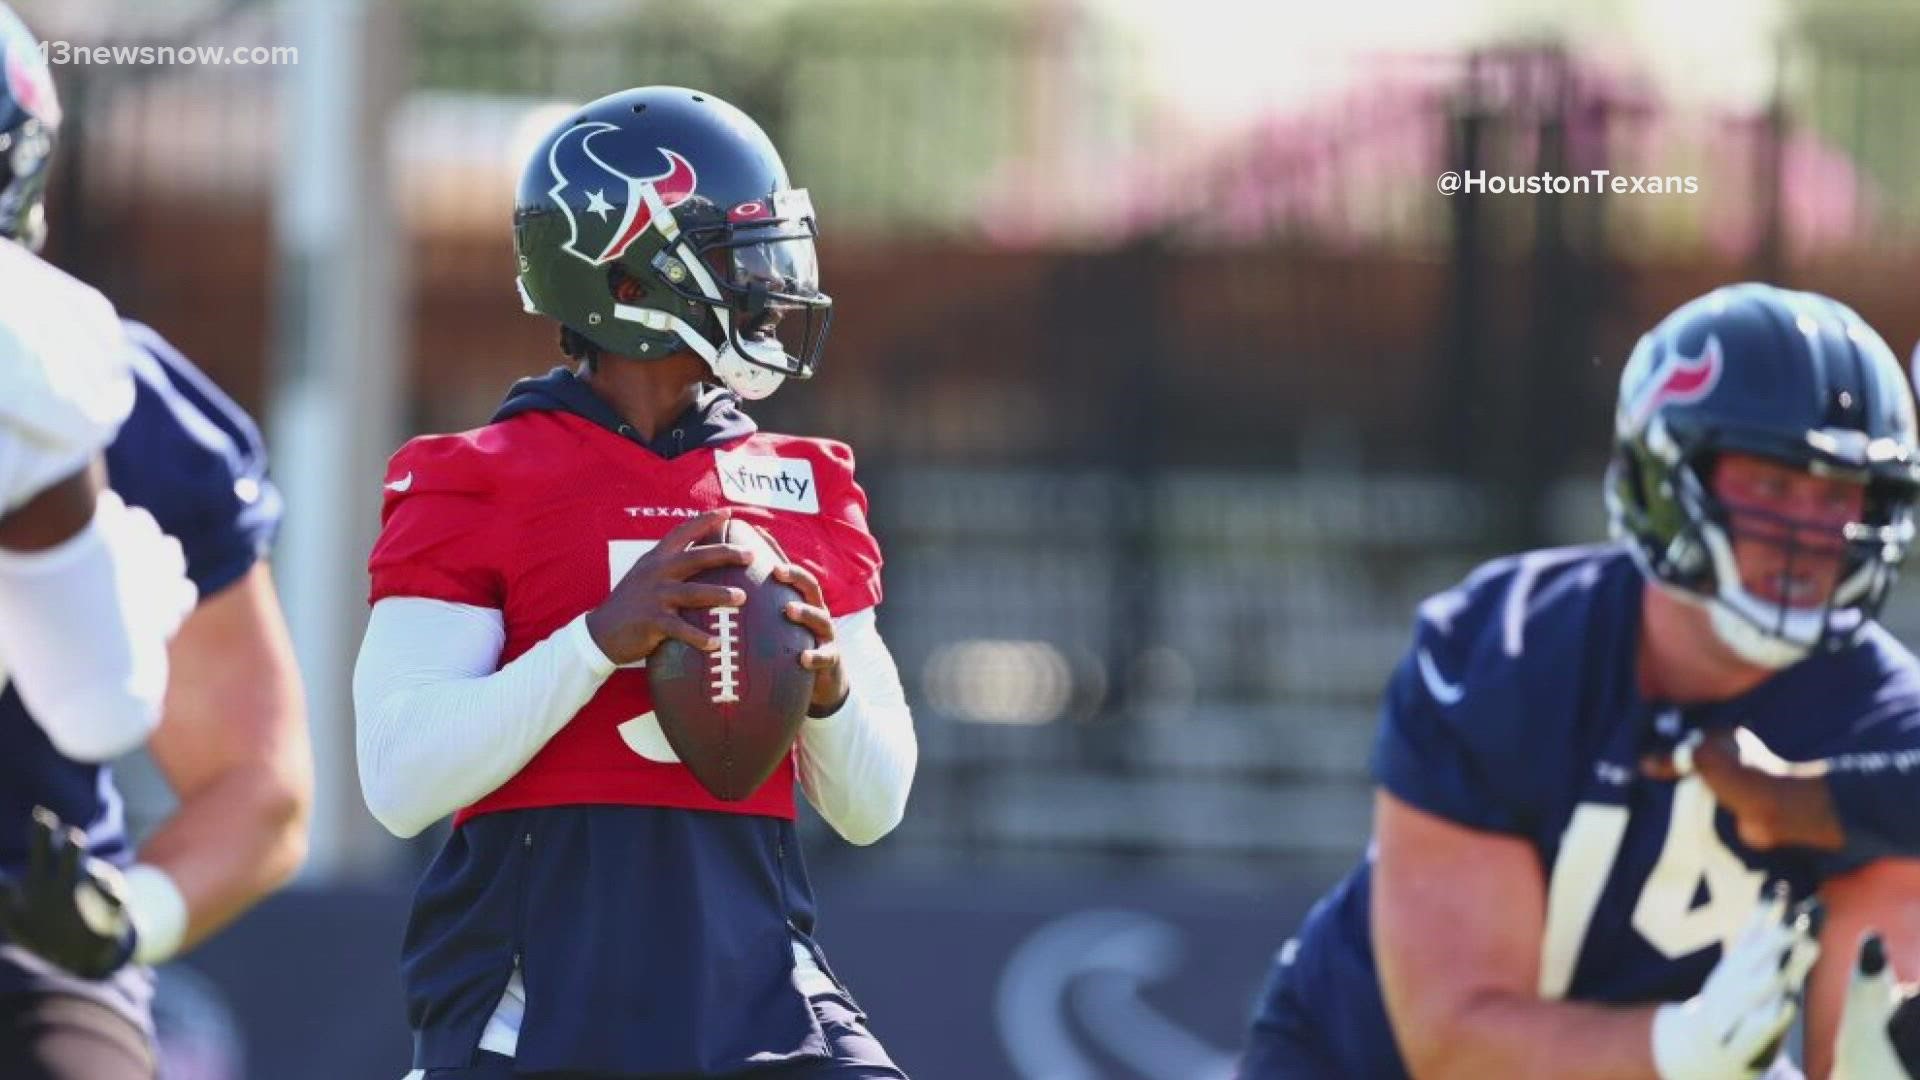 Taylor steps in as Texans QB amid uncertainty with Watson